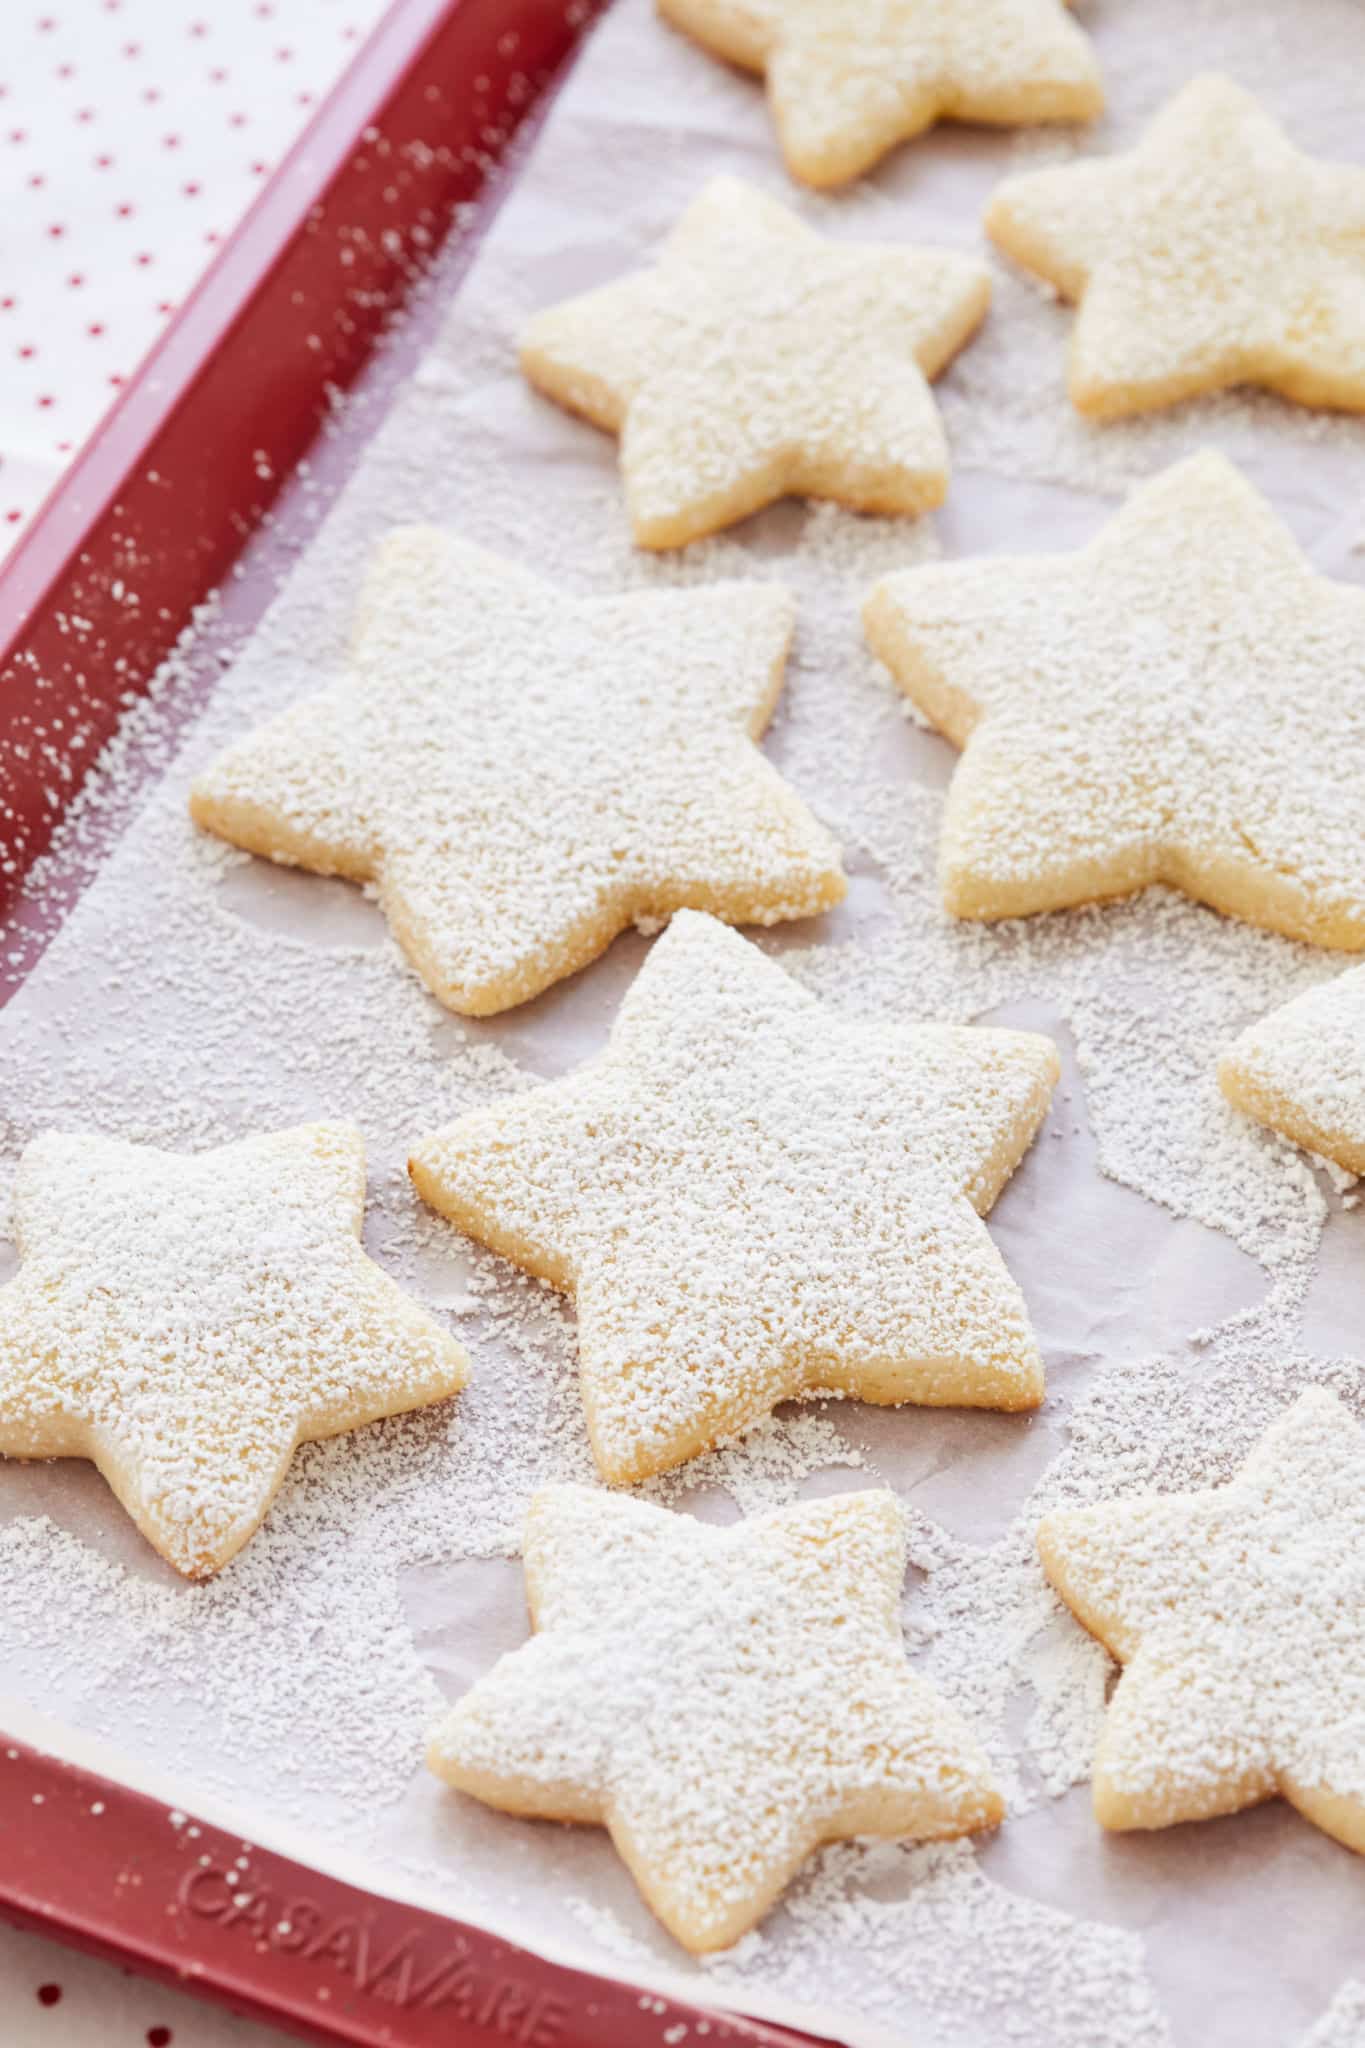 Bredele cookies, cut in the shape of stars, are dusted with powdered sugar on top of a red baking pan layered with parchment paper.